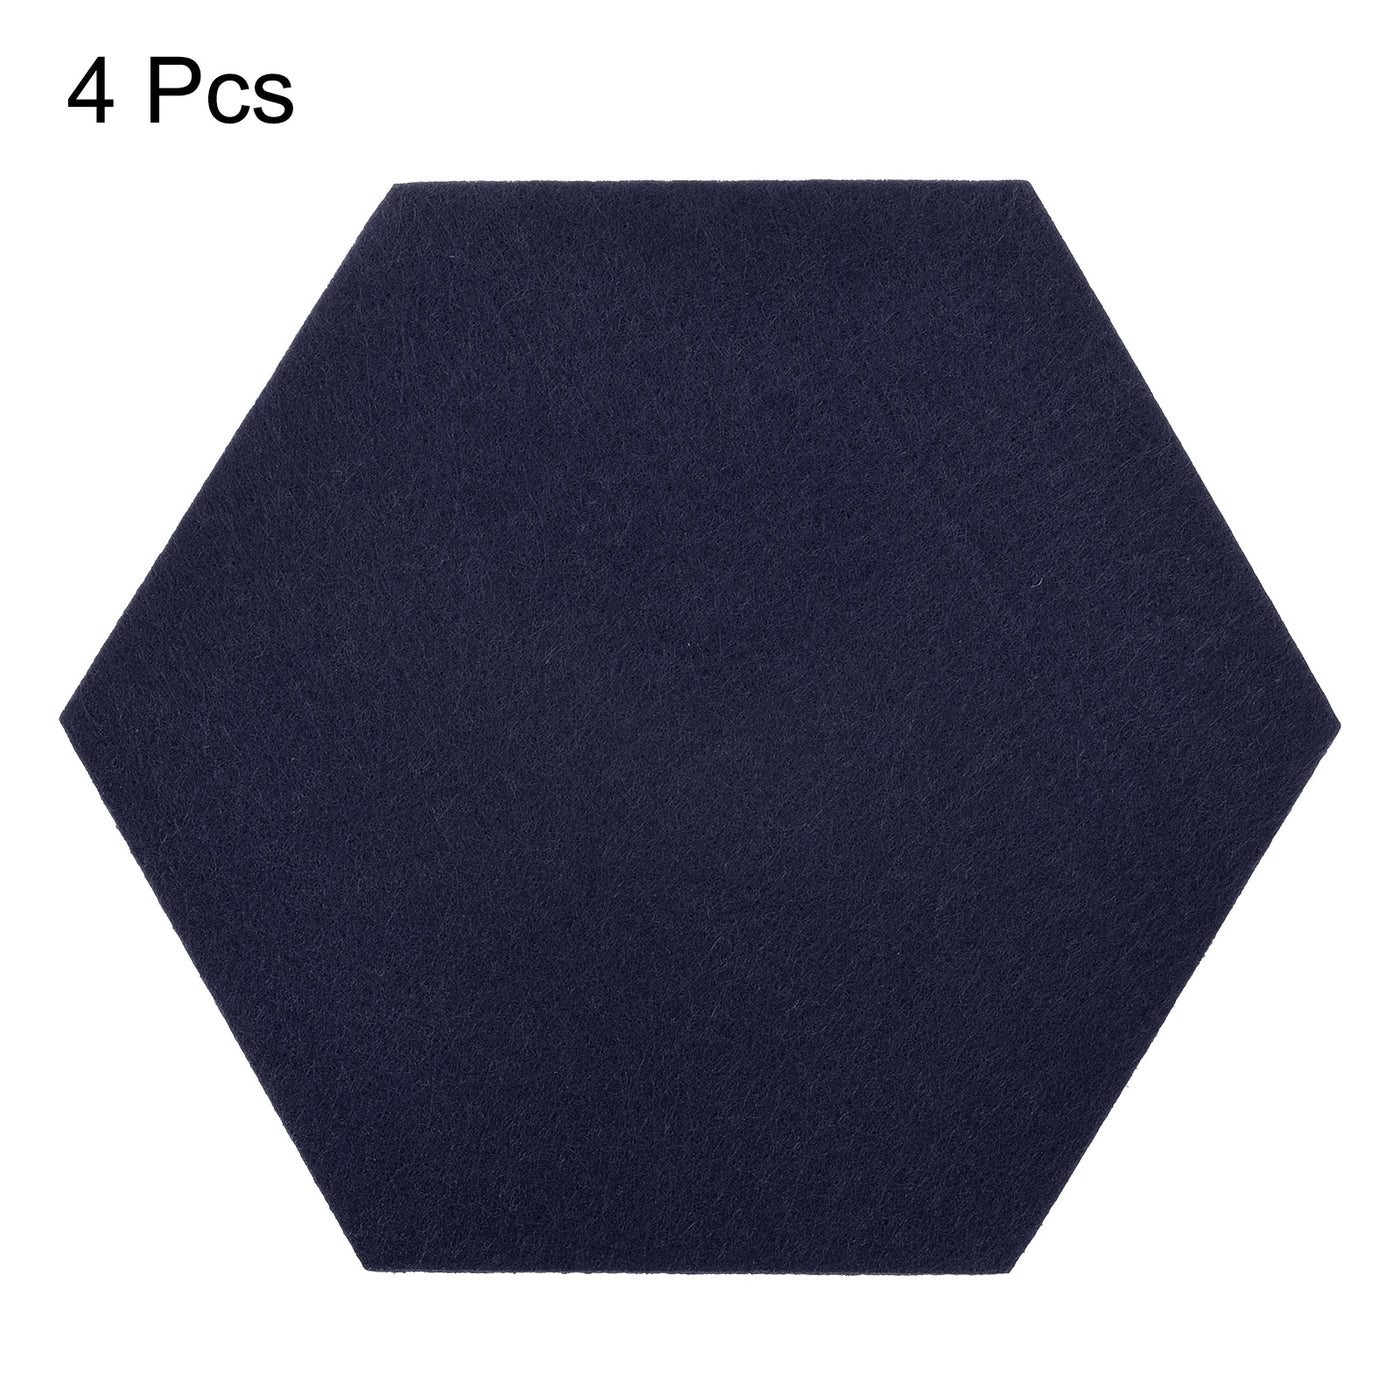 uxcell Uxcell Felt Coasters 4pcs Absorbent Pad Coaster for Drink Cup Pot Bowl Vase Dark Blue